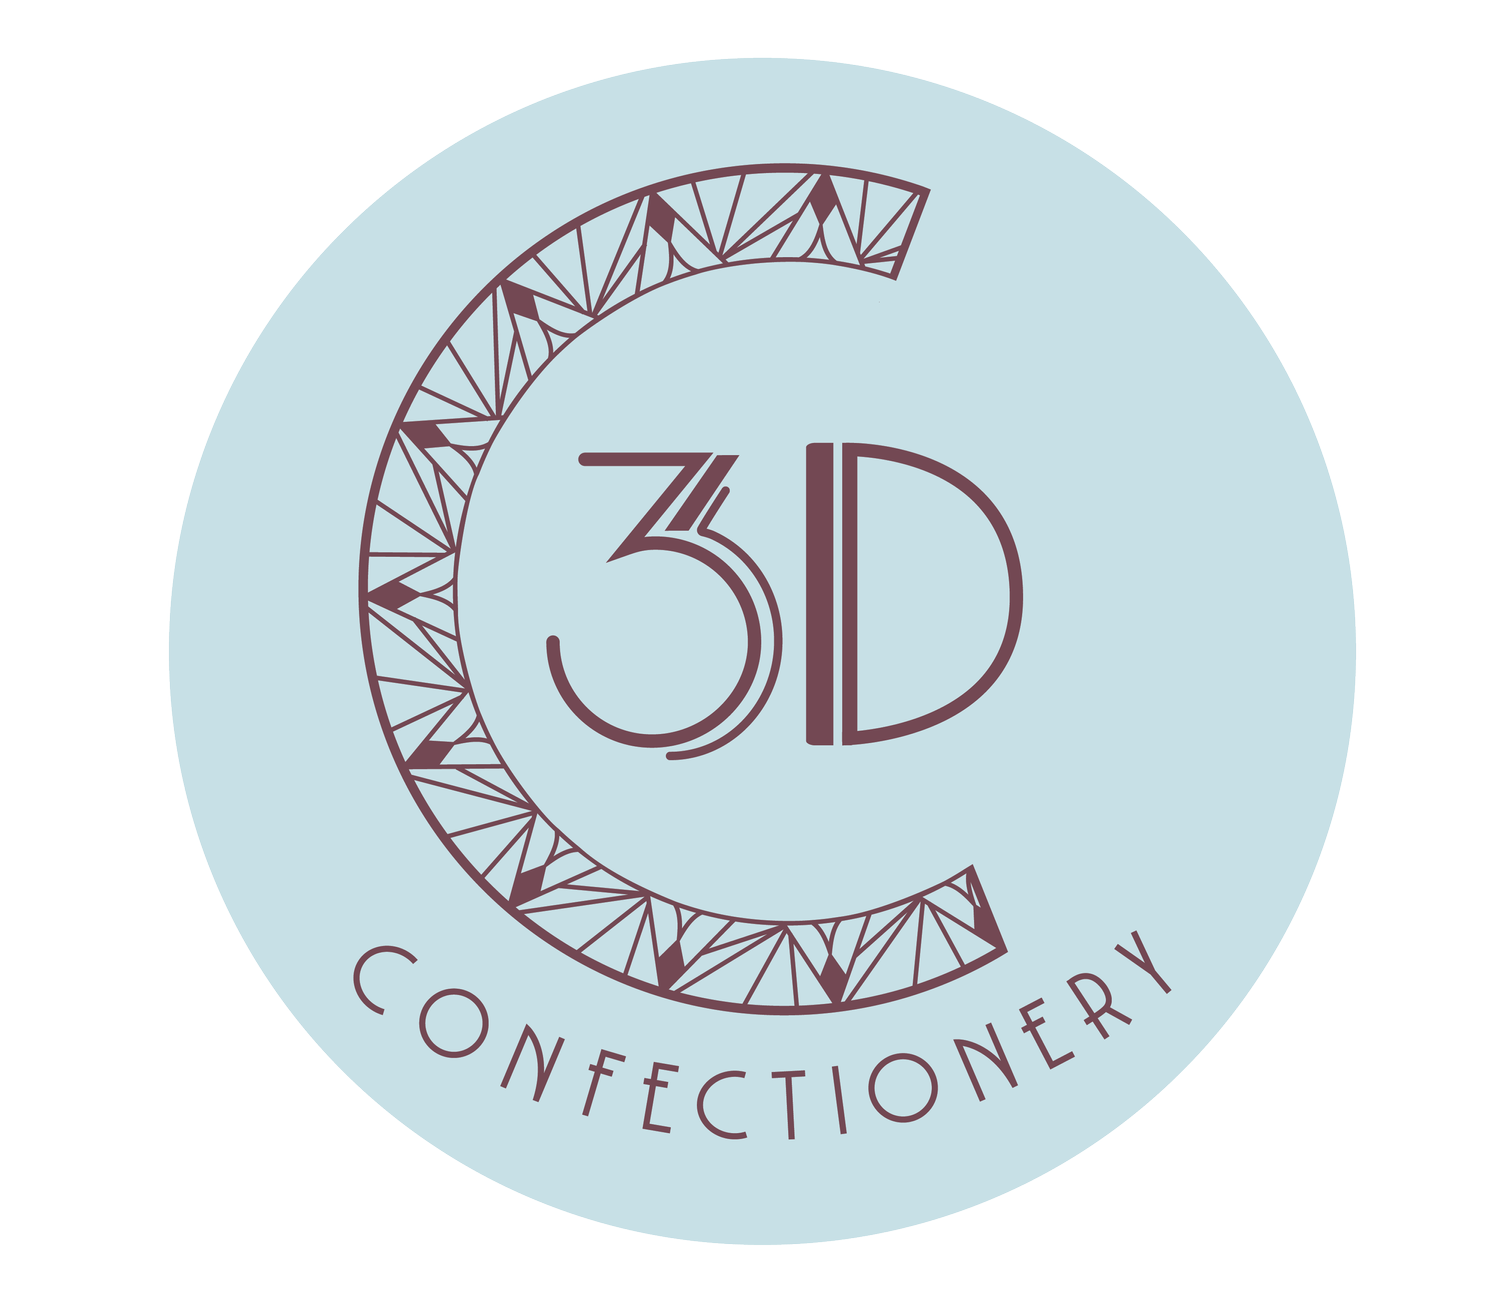 3D Confectionery